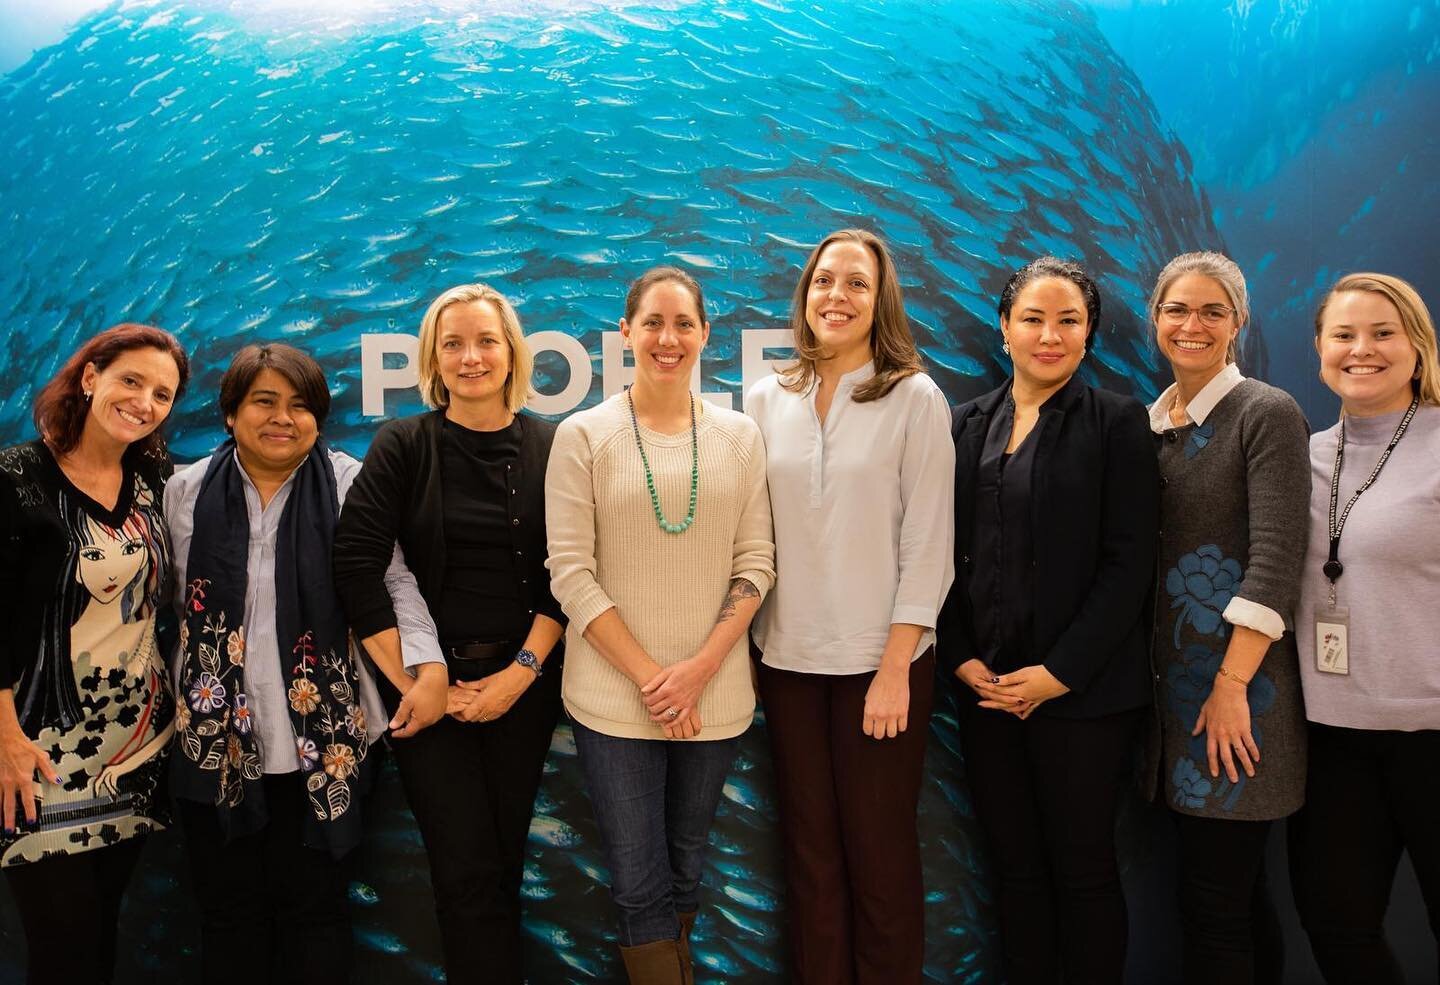 The @conservationorg ladies of #blueclimate ✨💙✨ working everyday to advance climate adaptation with #greengray infrastructure and ocean-based mitigation with #bluecarbon